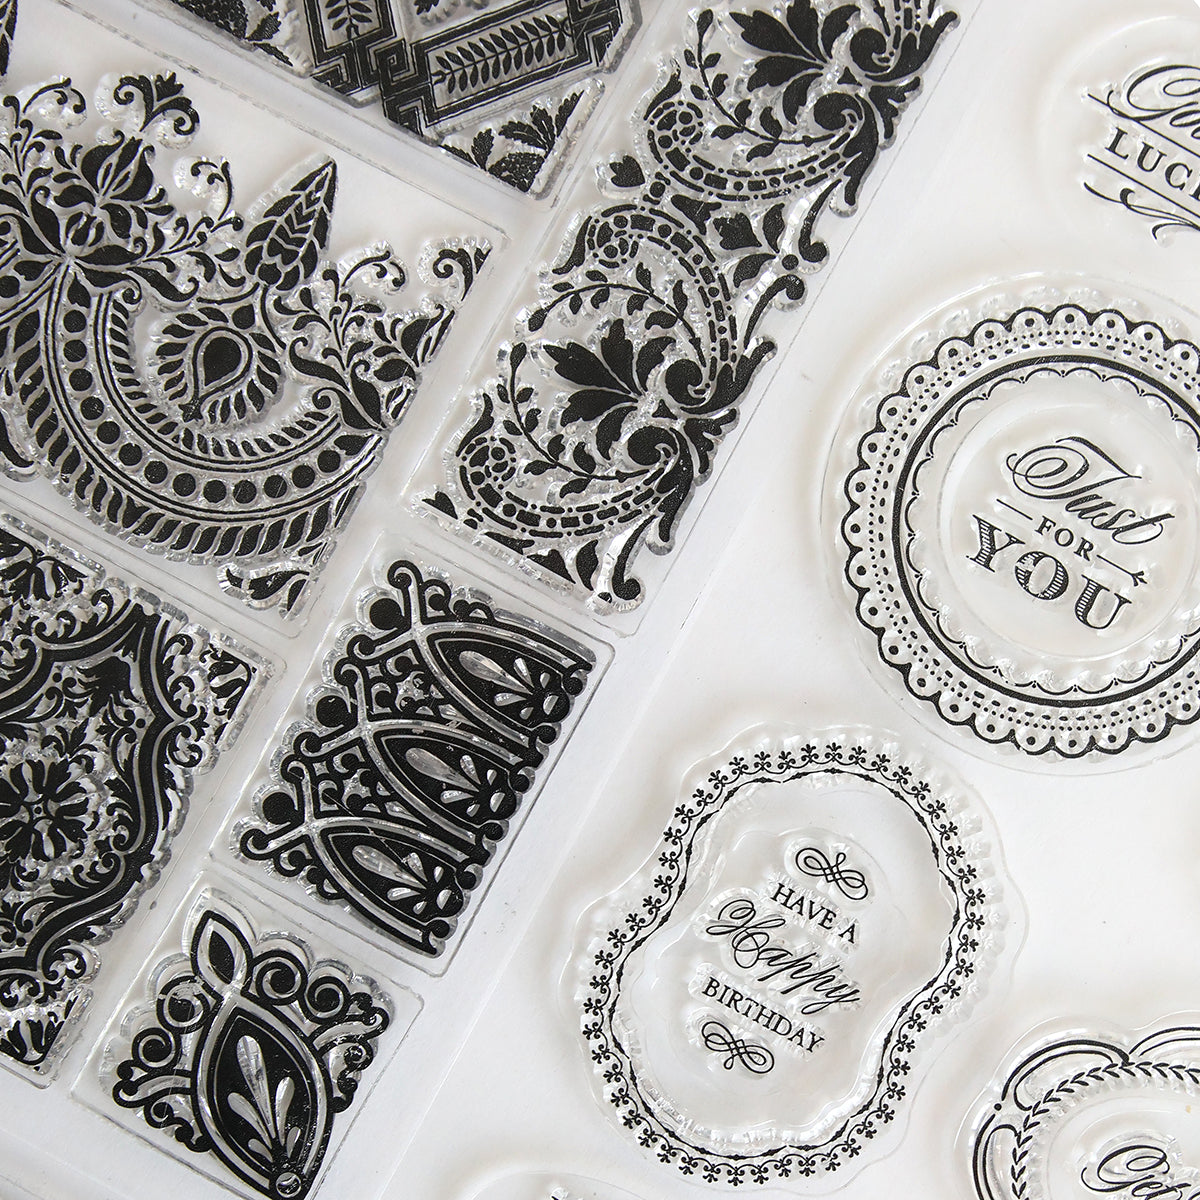 An Anniversary Stamp Set with black and white designs, perfect for creating stylish borders or adding stunning backgrounds to your projects.